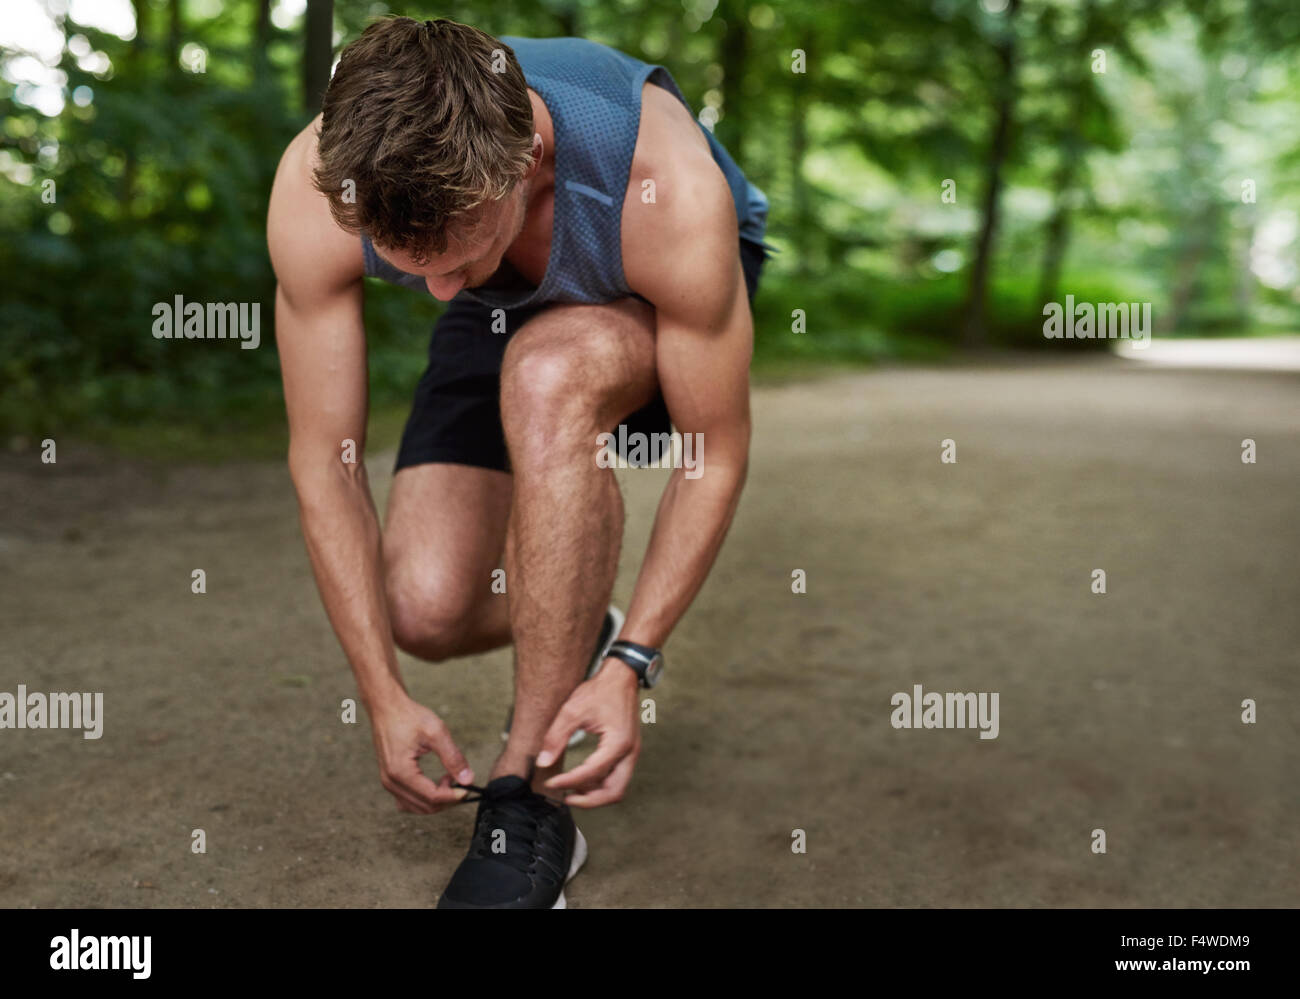 Fit muscular male jogger bending down tying his shoe laces in a track through a lush wooded park in a healthy lifestyle concept Stock Photo